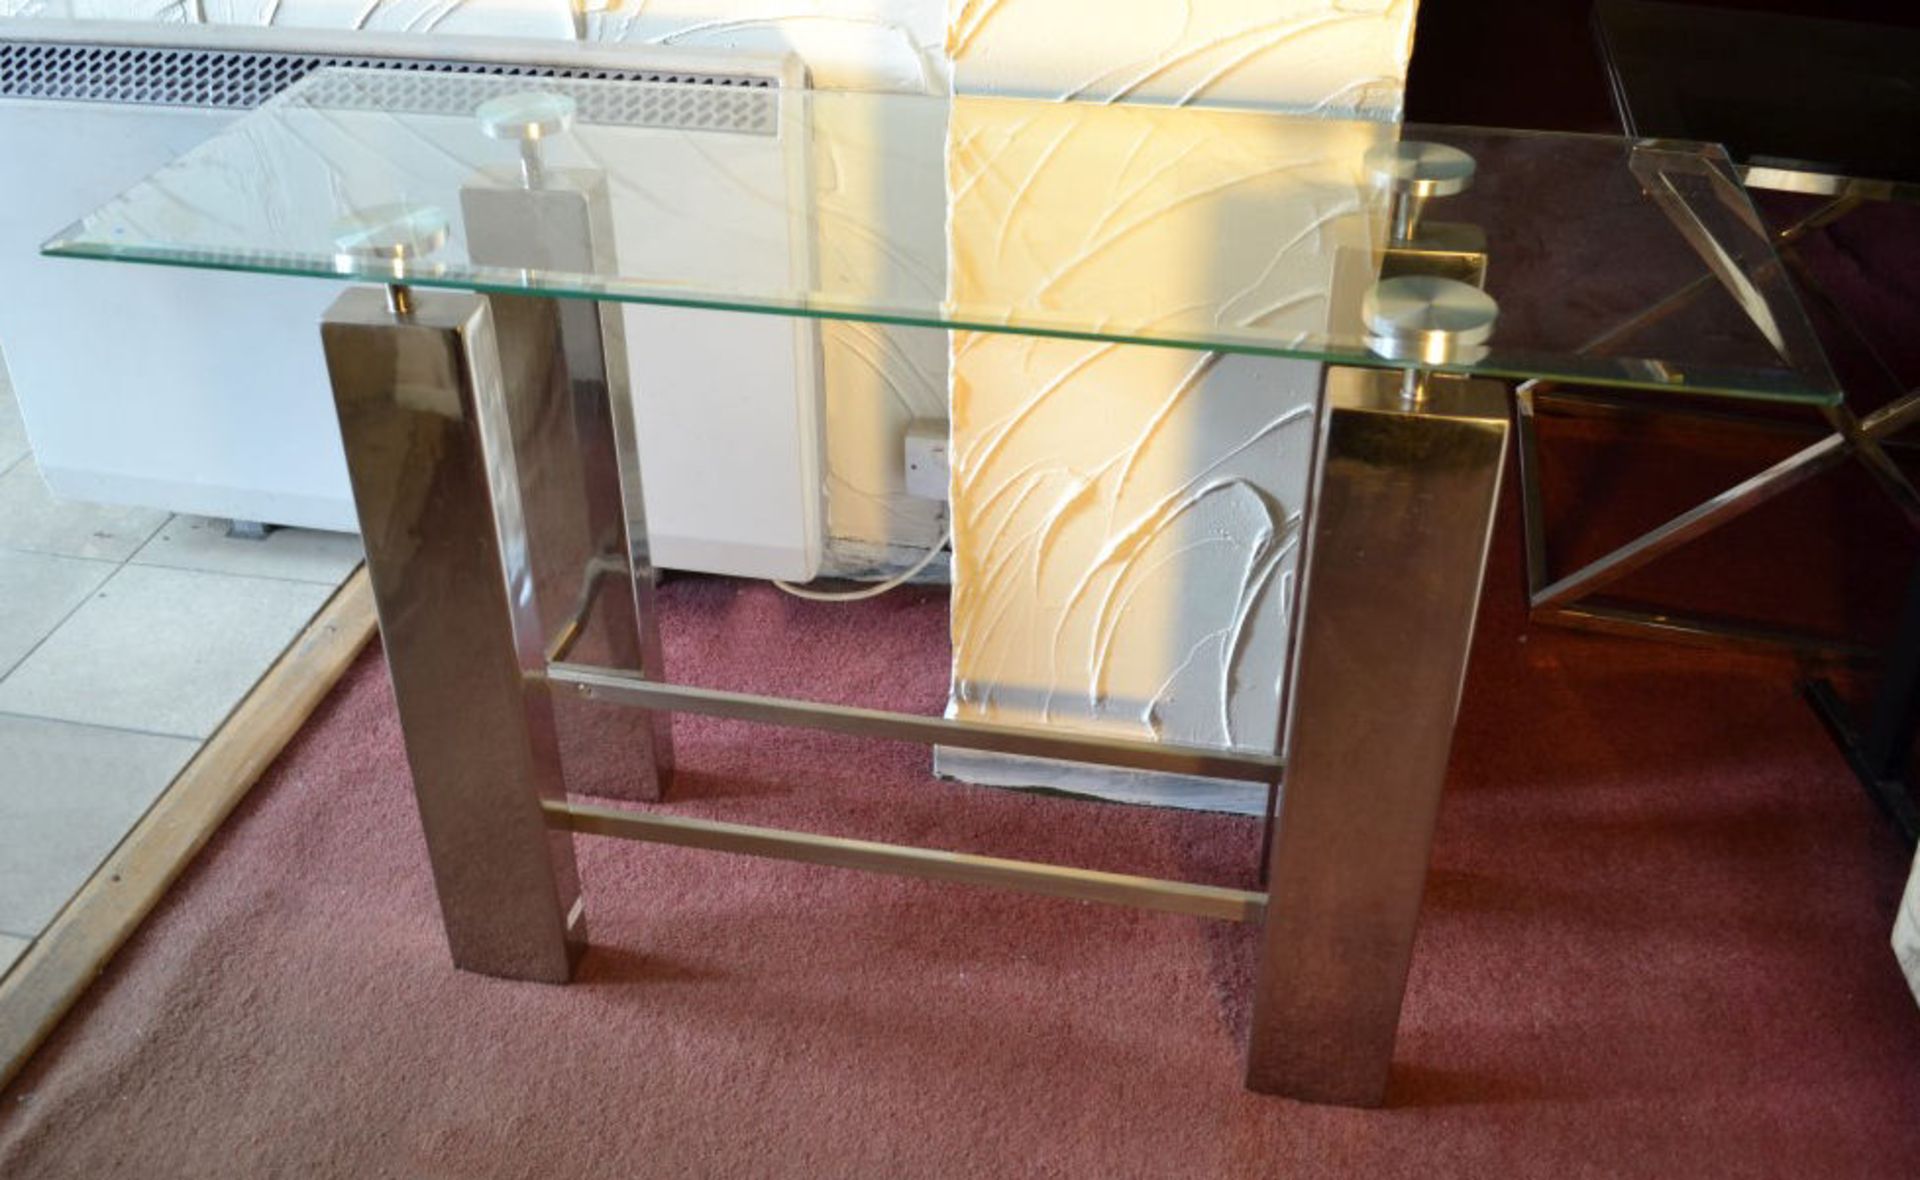 1 x Contemporary Glass Top Console Table With Silver Metal Legs - CL108 - Image 3 of 5